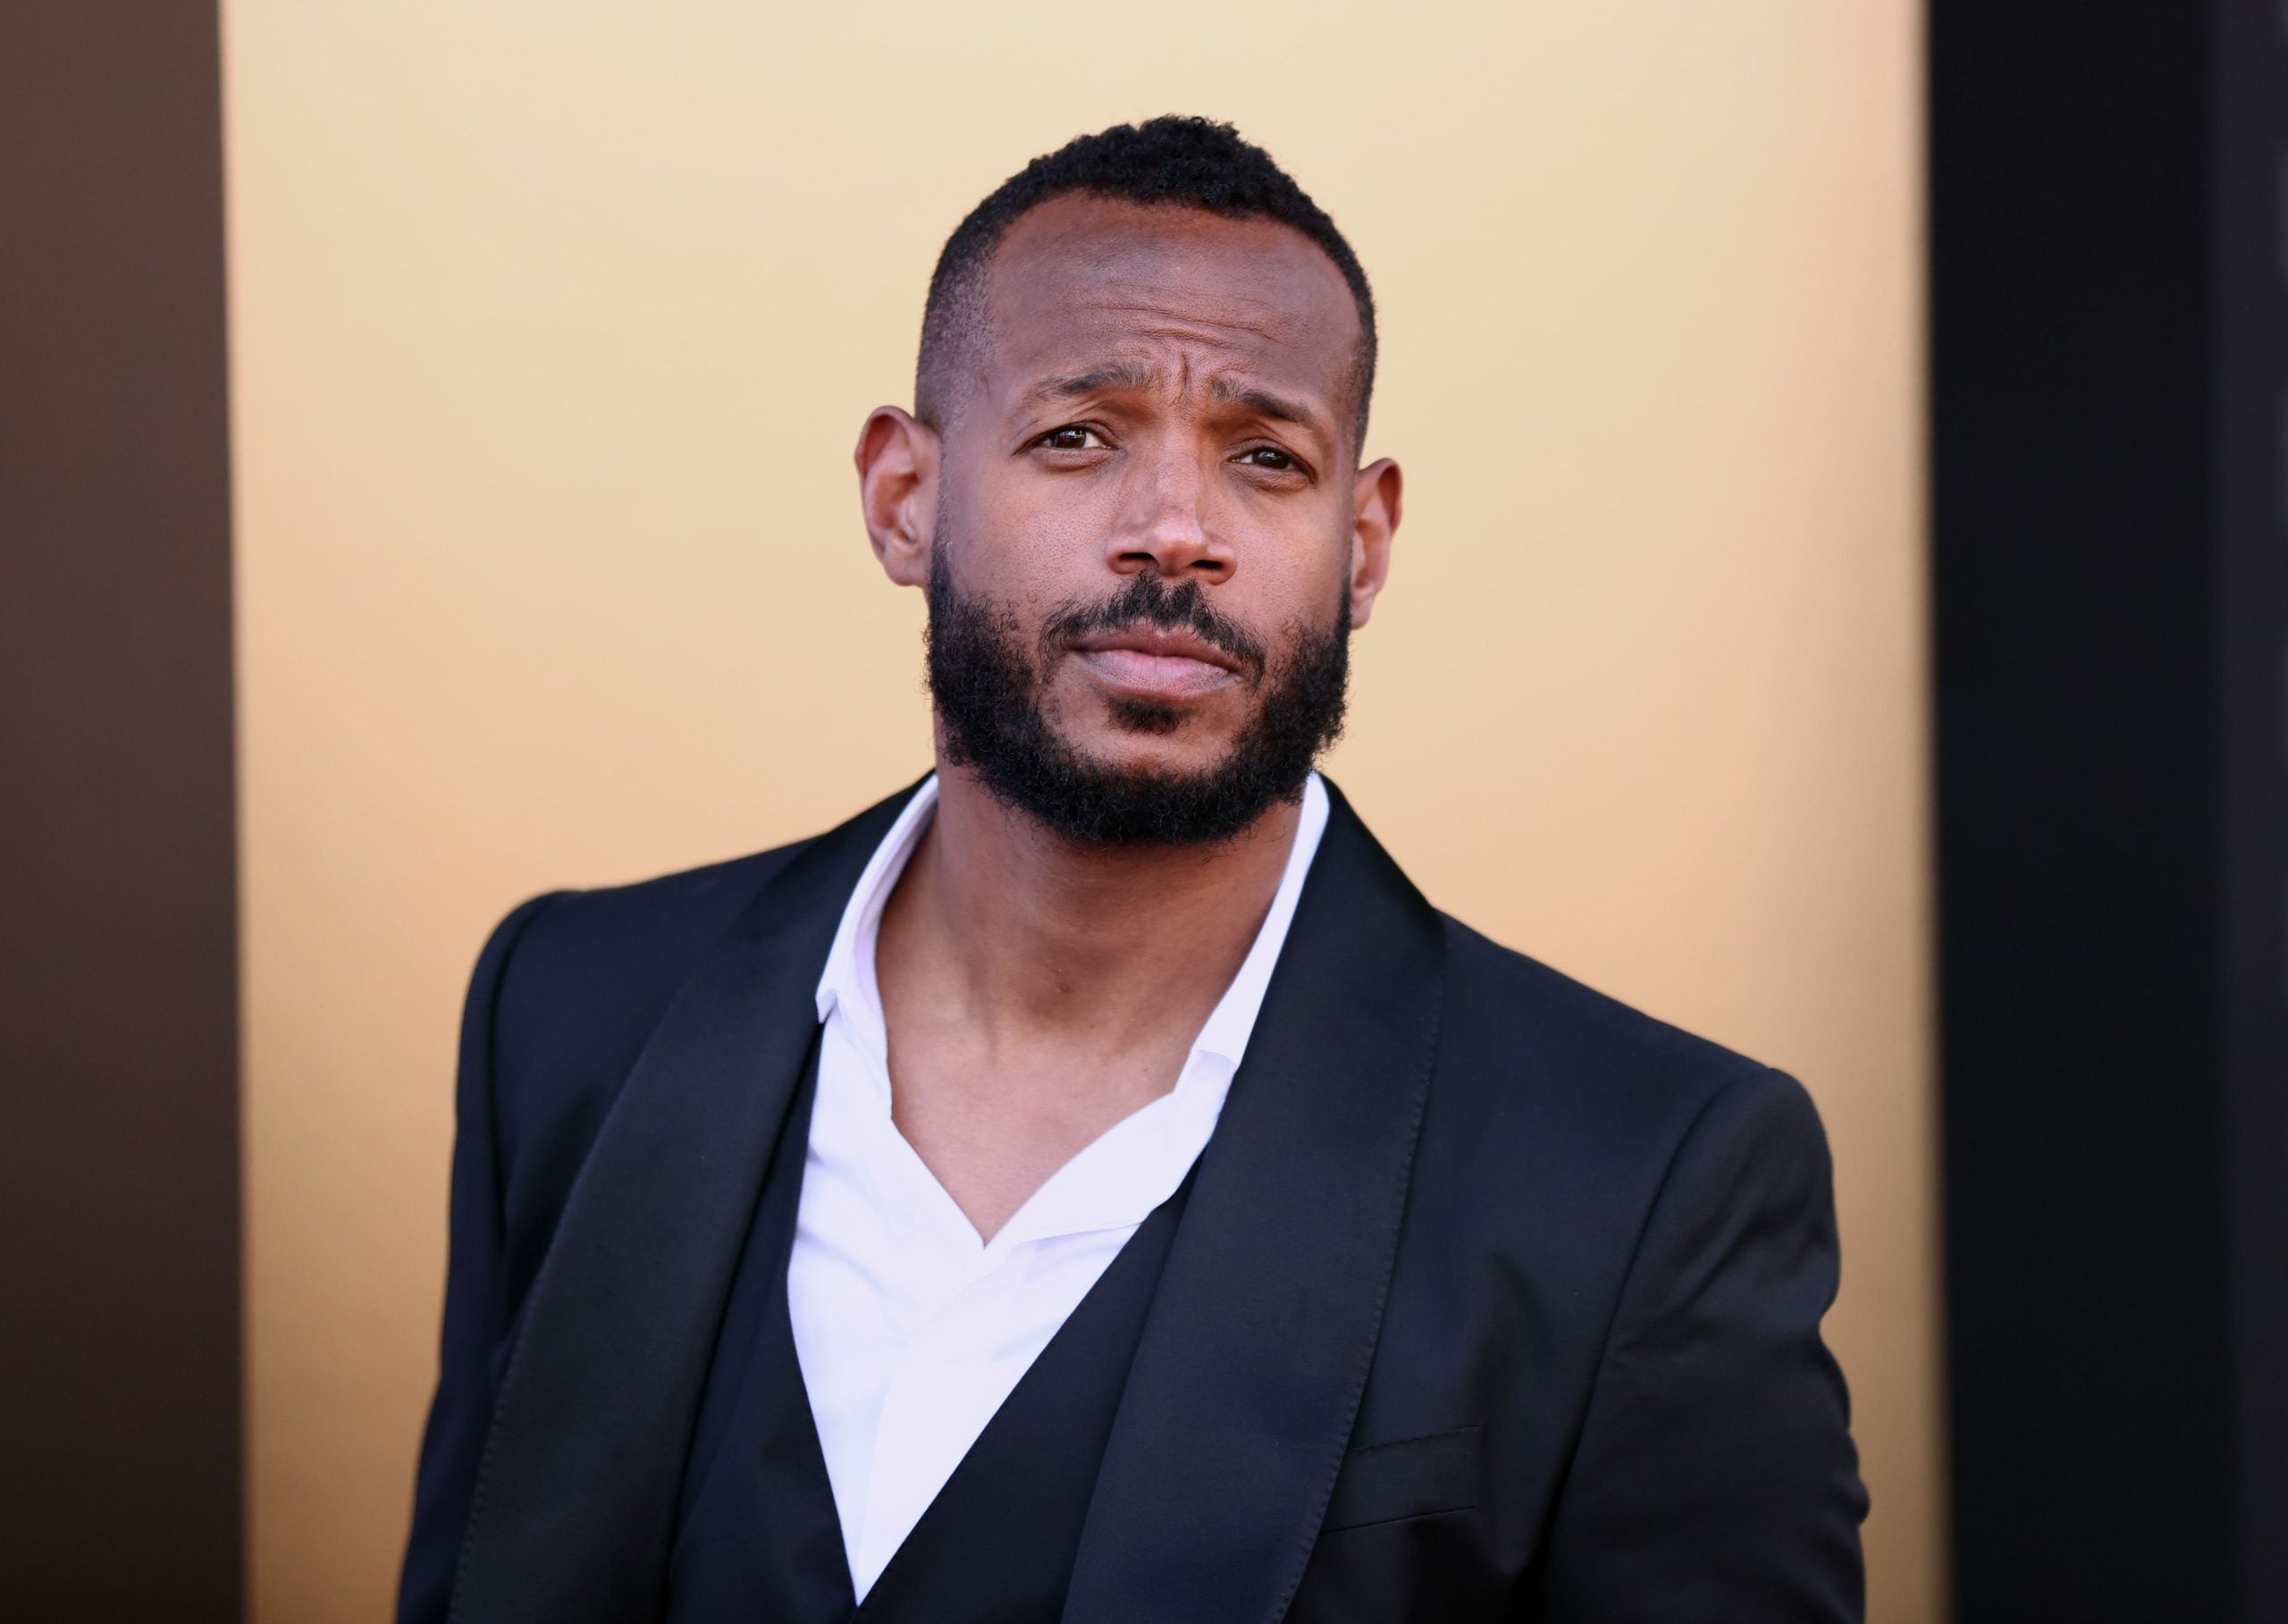 Marlon Wayans Says Mother Of His One-Year-Old Daughter Is “Entitled” Amid Paternity Lawsuit